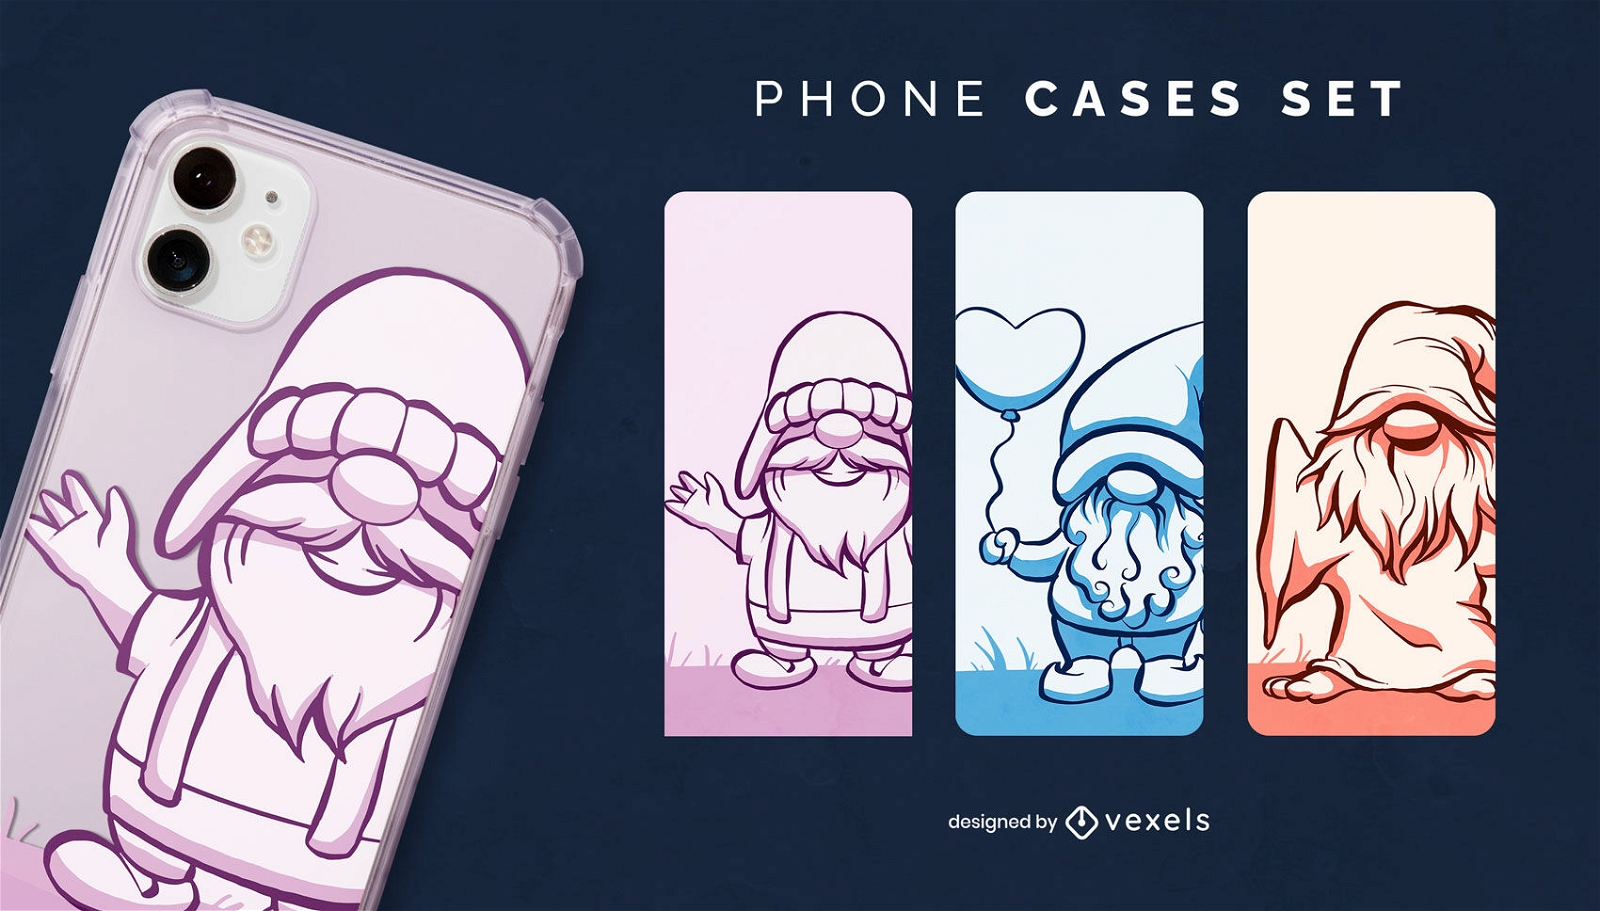 Gnome cartoon character phone cases set